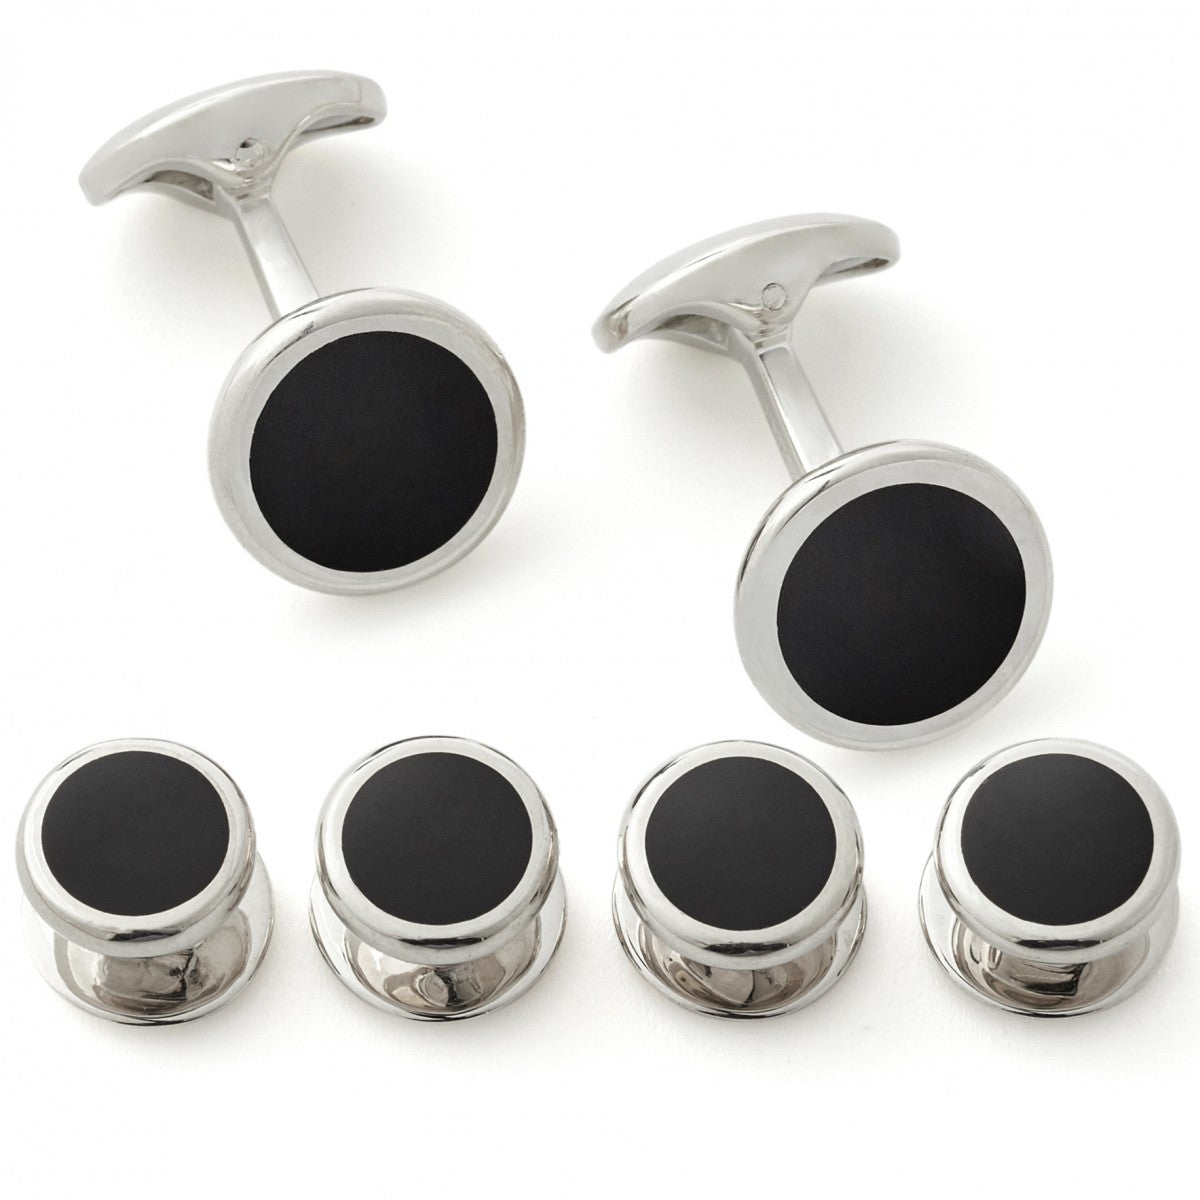 Deakin and Francis Round Black Cufflinks and Studs Set, Sterling Silver and Black Onyx